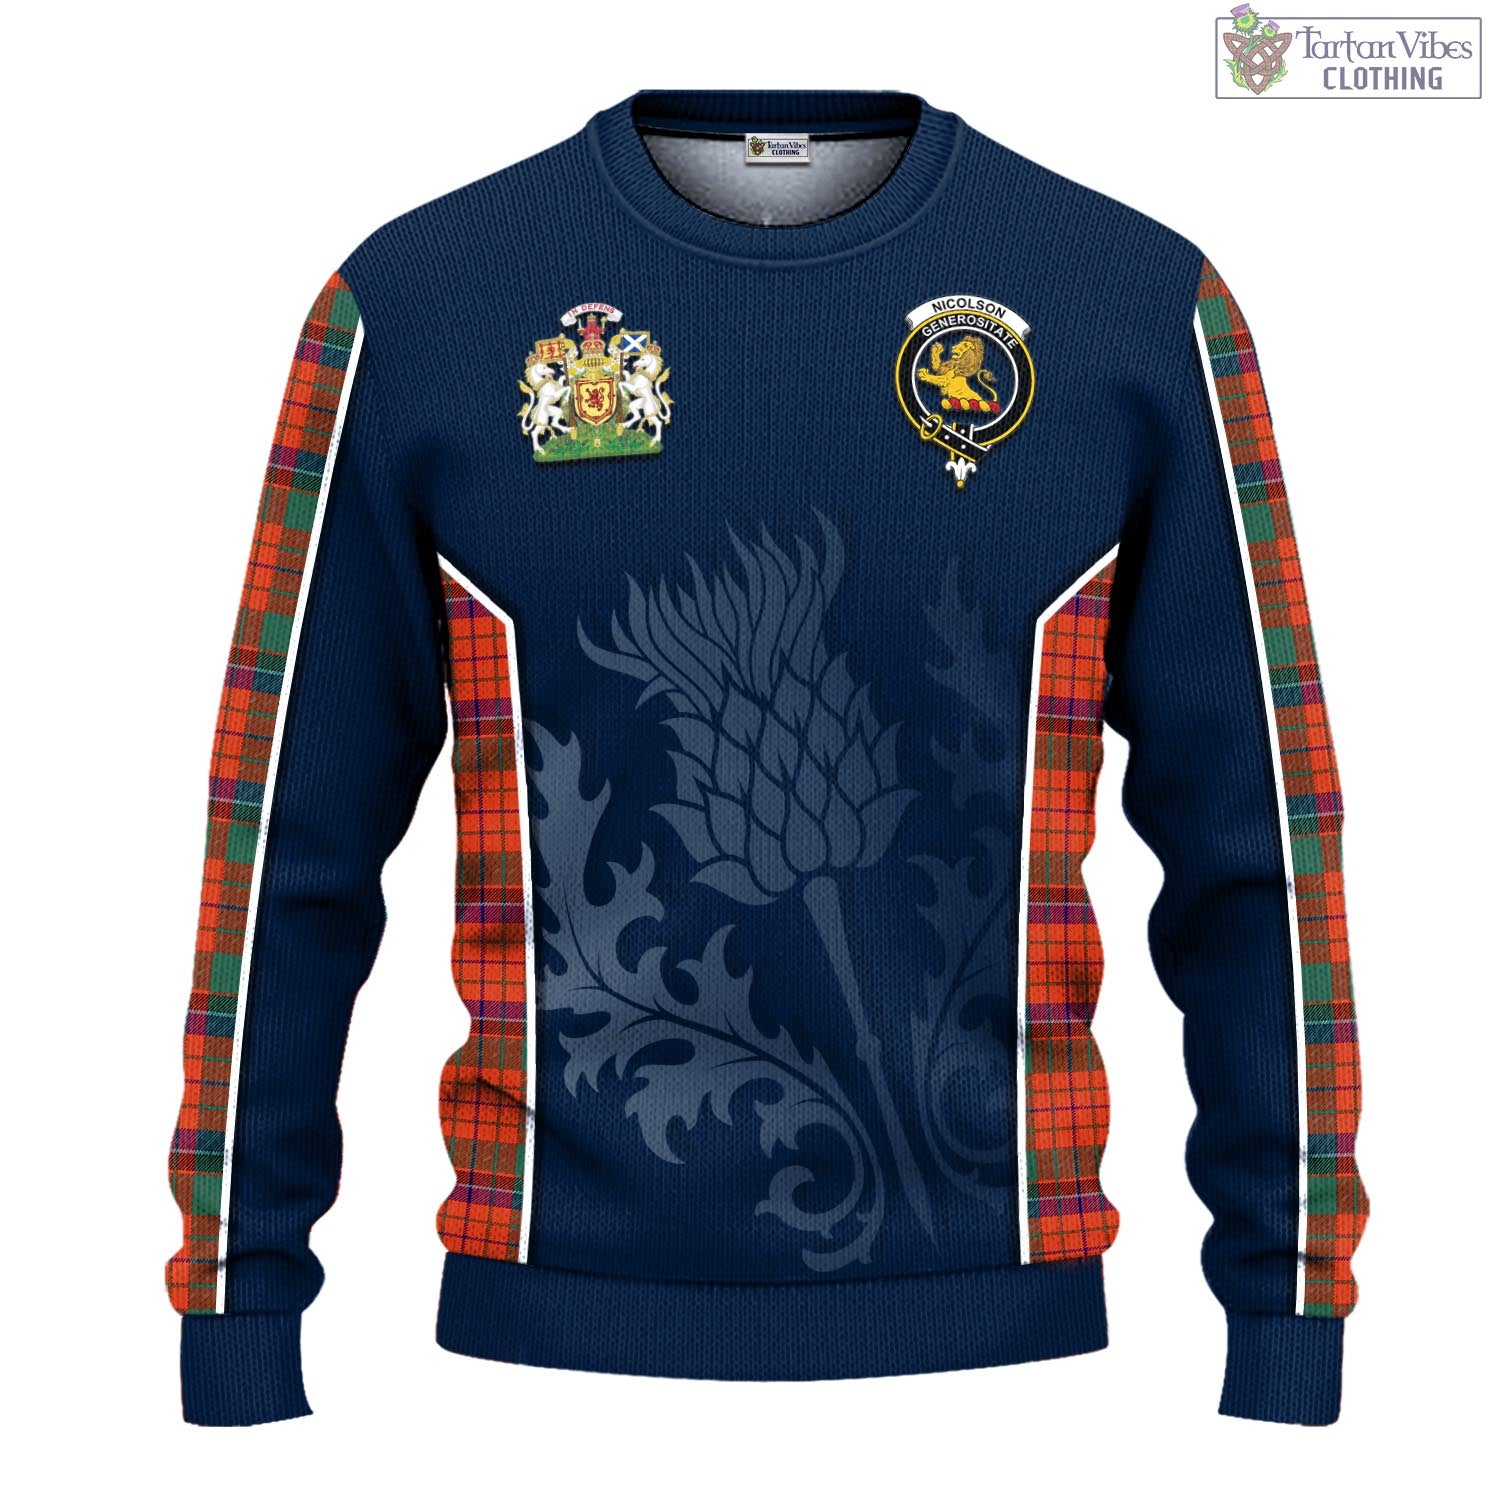 Tartan Vibes Clothing Nicolson Ancient Tartan Knitted Sweatshirt with Family Crest and Scottish Thistle Vibes Sport Style